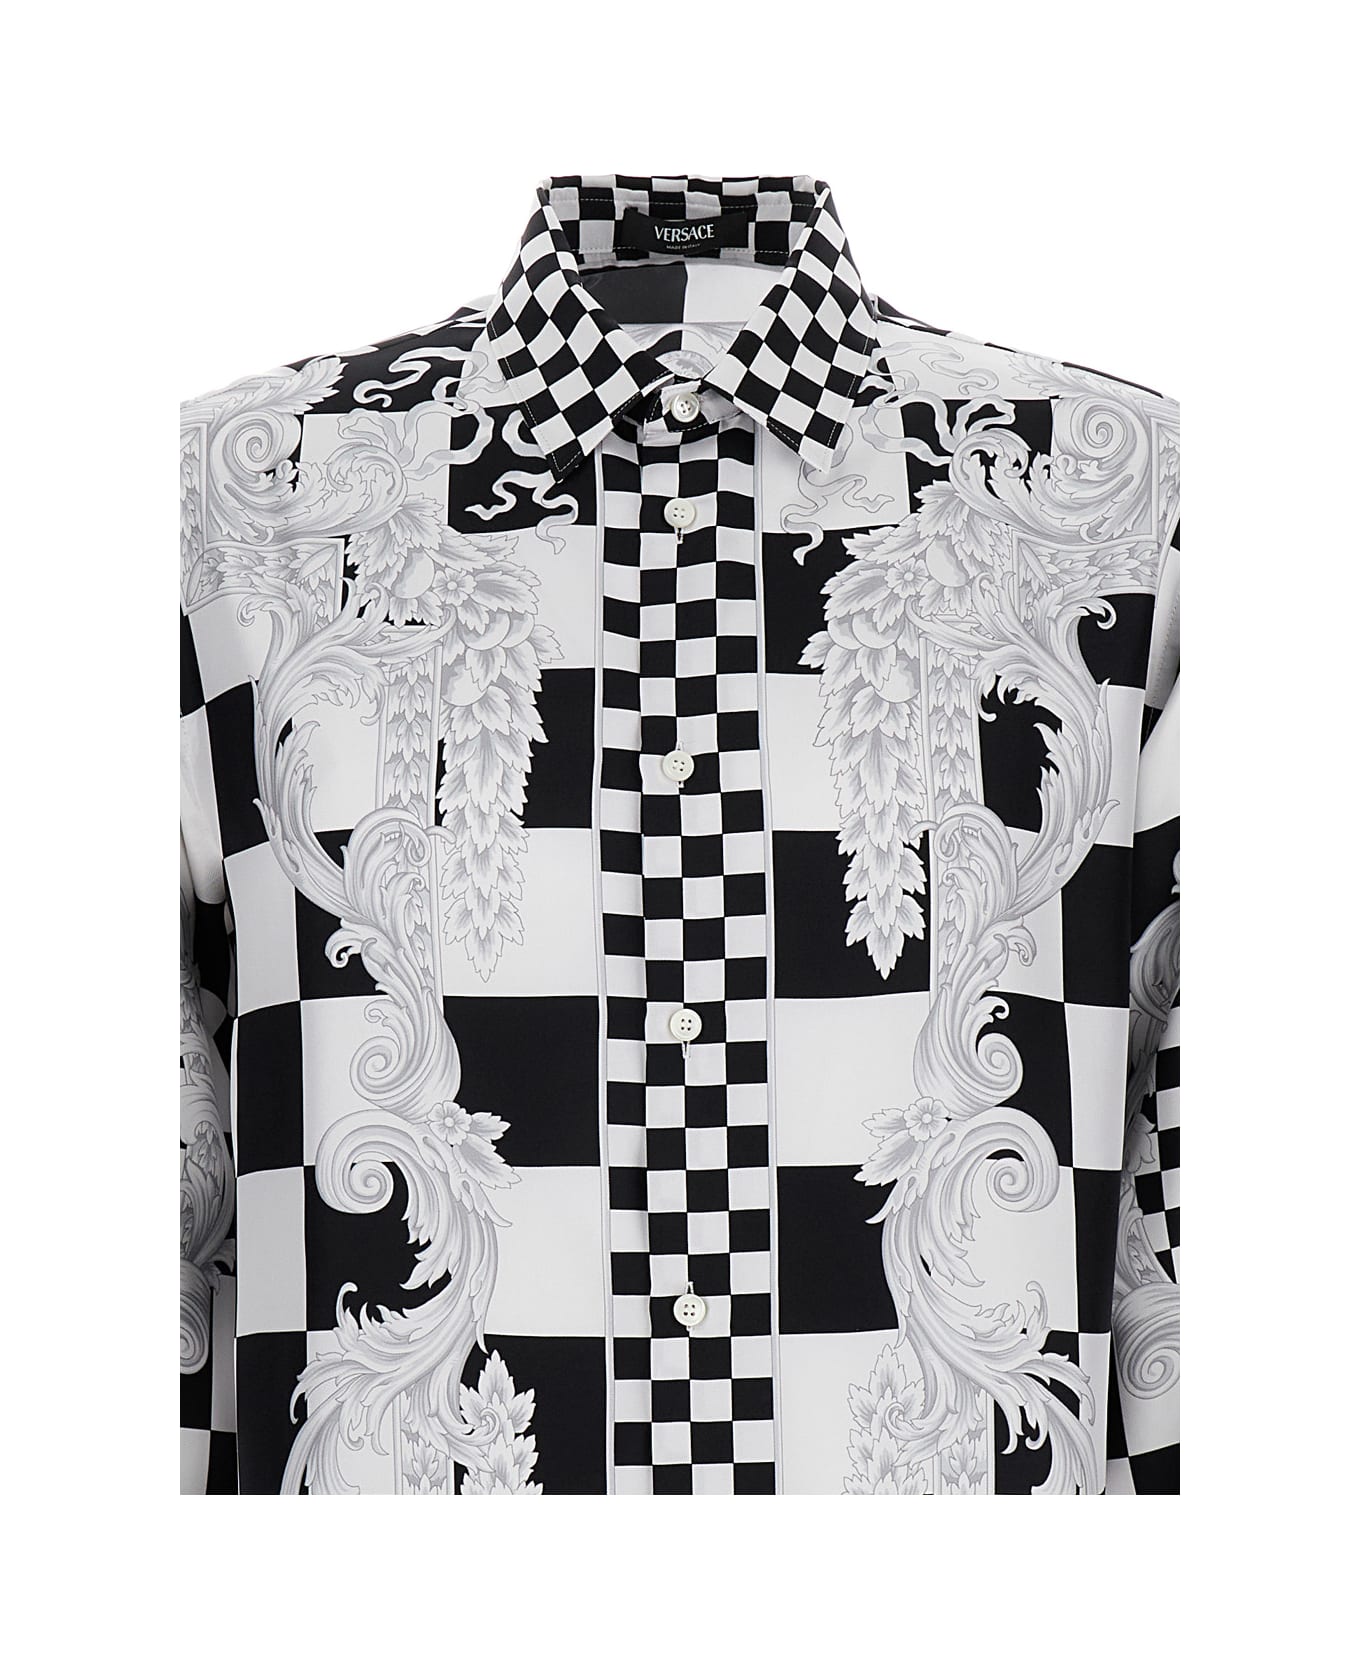 Versace Black And White Chechered Shirt With Baroque Pattern And Medusa Heas In Silk Man - White